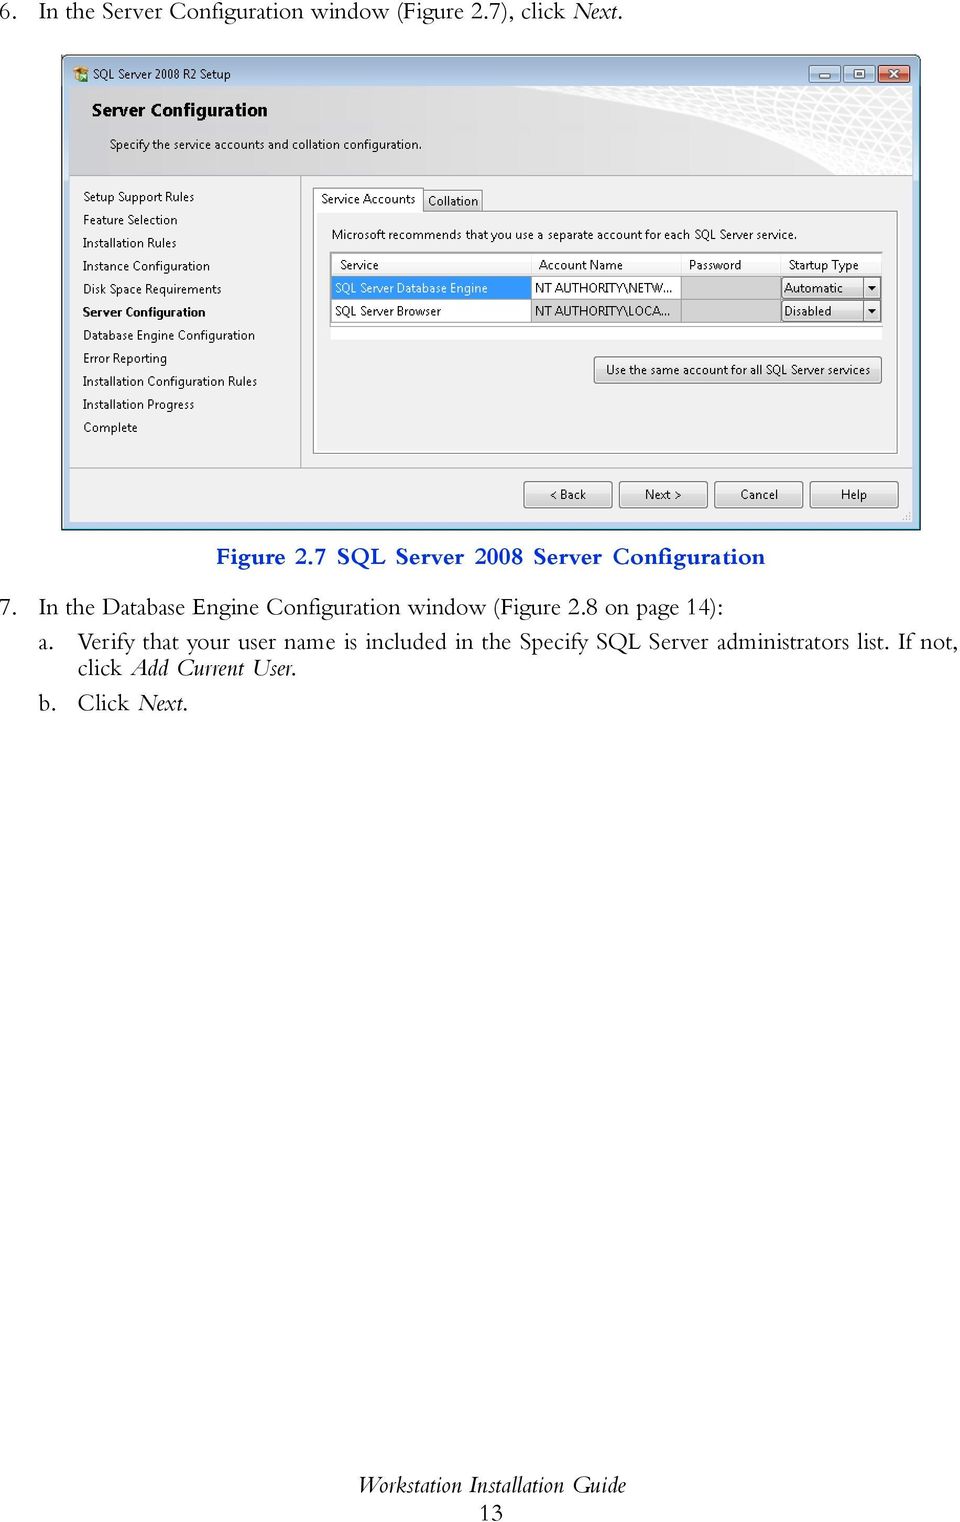 In the Database Engine Configuration window (Figure 2.8 on page 14): a.